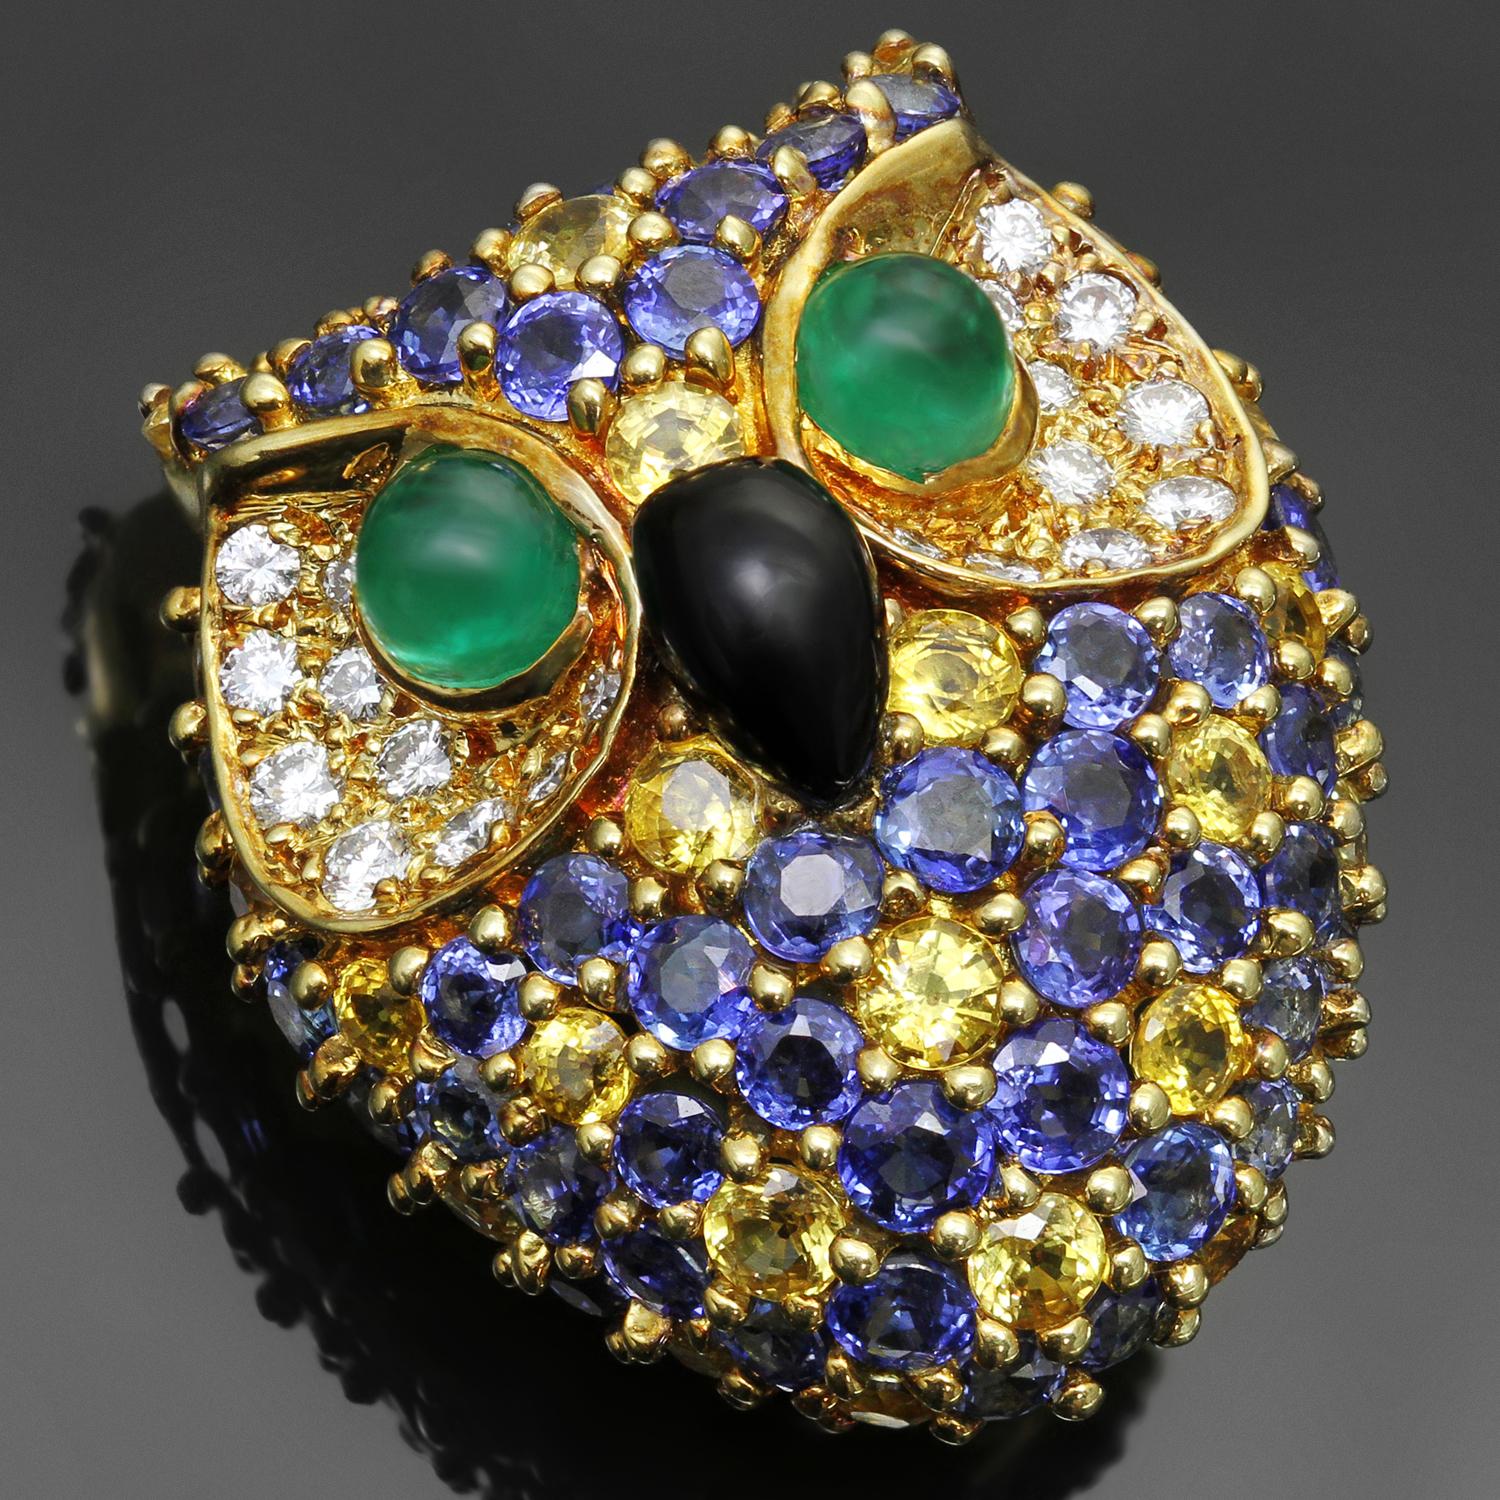 This rare and spectacular Van Cleef & Arpels brooch features a sparkling owl design crafted in 18k yellow gold and set with 20 diamonds of an estimated 0.70 carats, 73 yellow and blue sapphires of an estimated 8.00 carats, completed with 2 cabochon